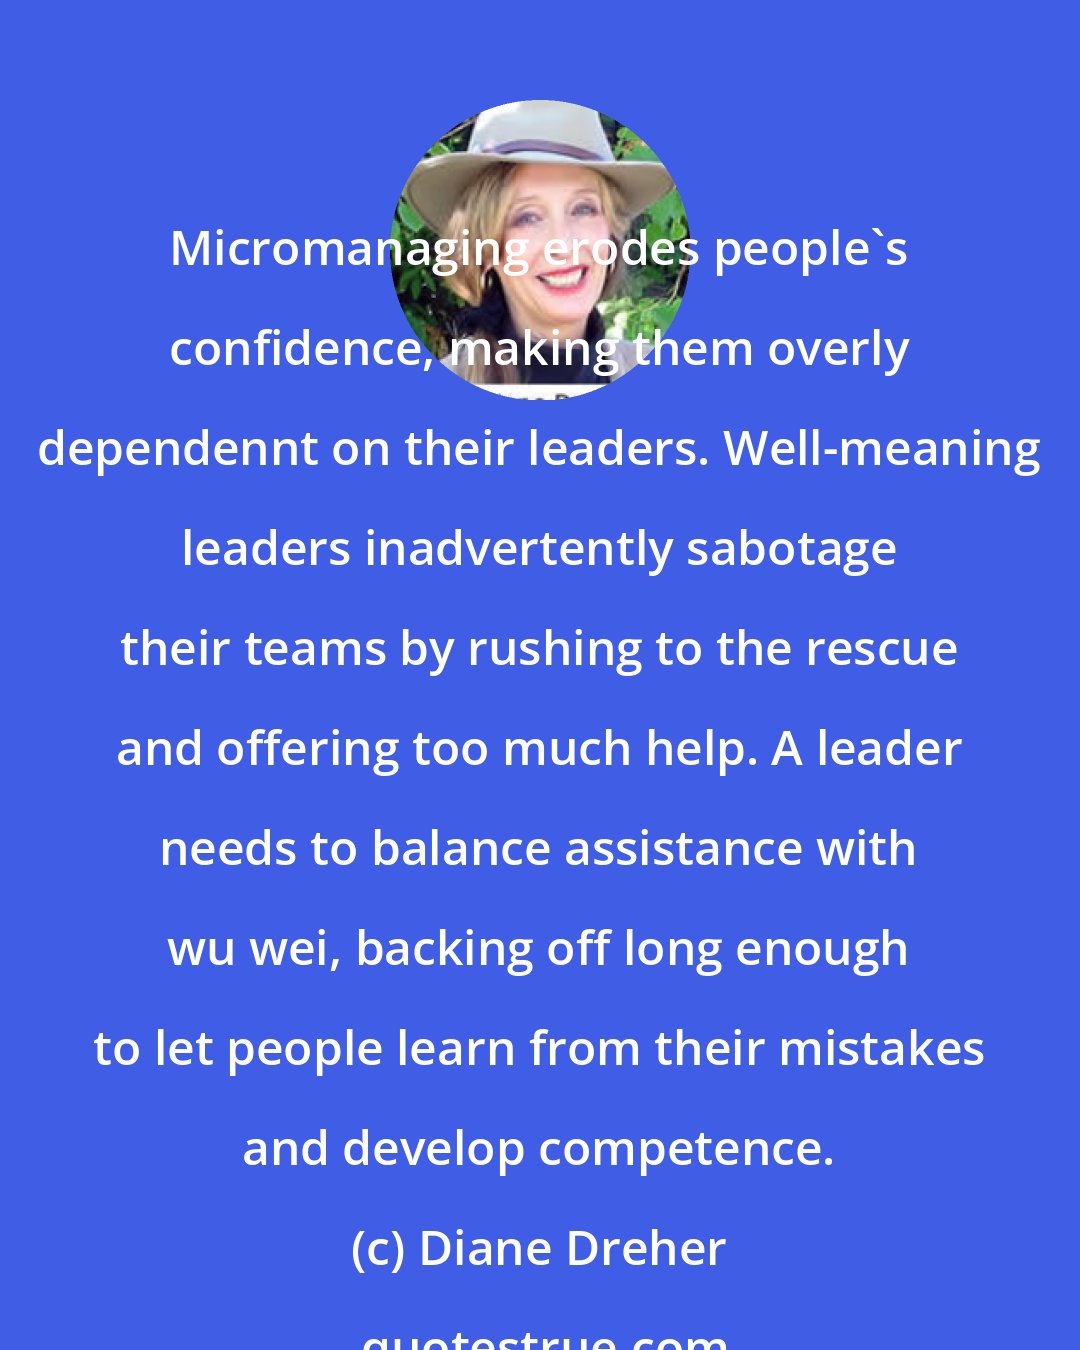 Diane Dreher: Micromanaging erodes people's confidence, making them overly dependennt on their leaders. Well-meaning leaders inadvertently sabotage their teams by rushing to the rescue and offering too much help. A leader needs to balance assistance with wu wei, backing off long enough to let people learn from their mistakes and develop competence.